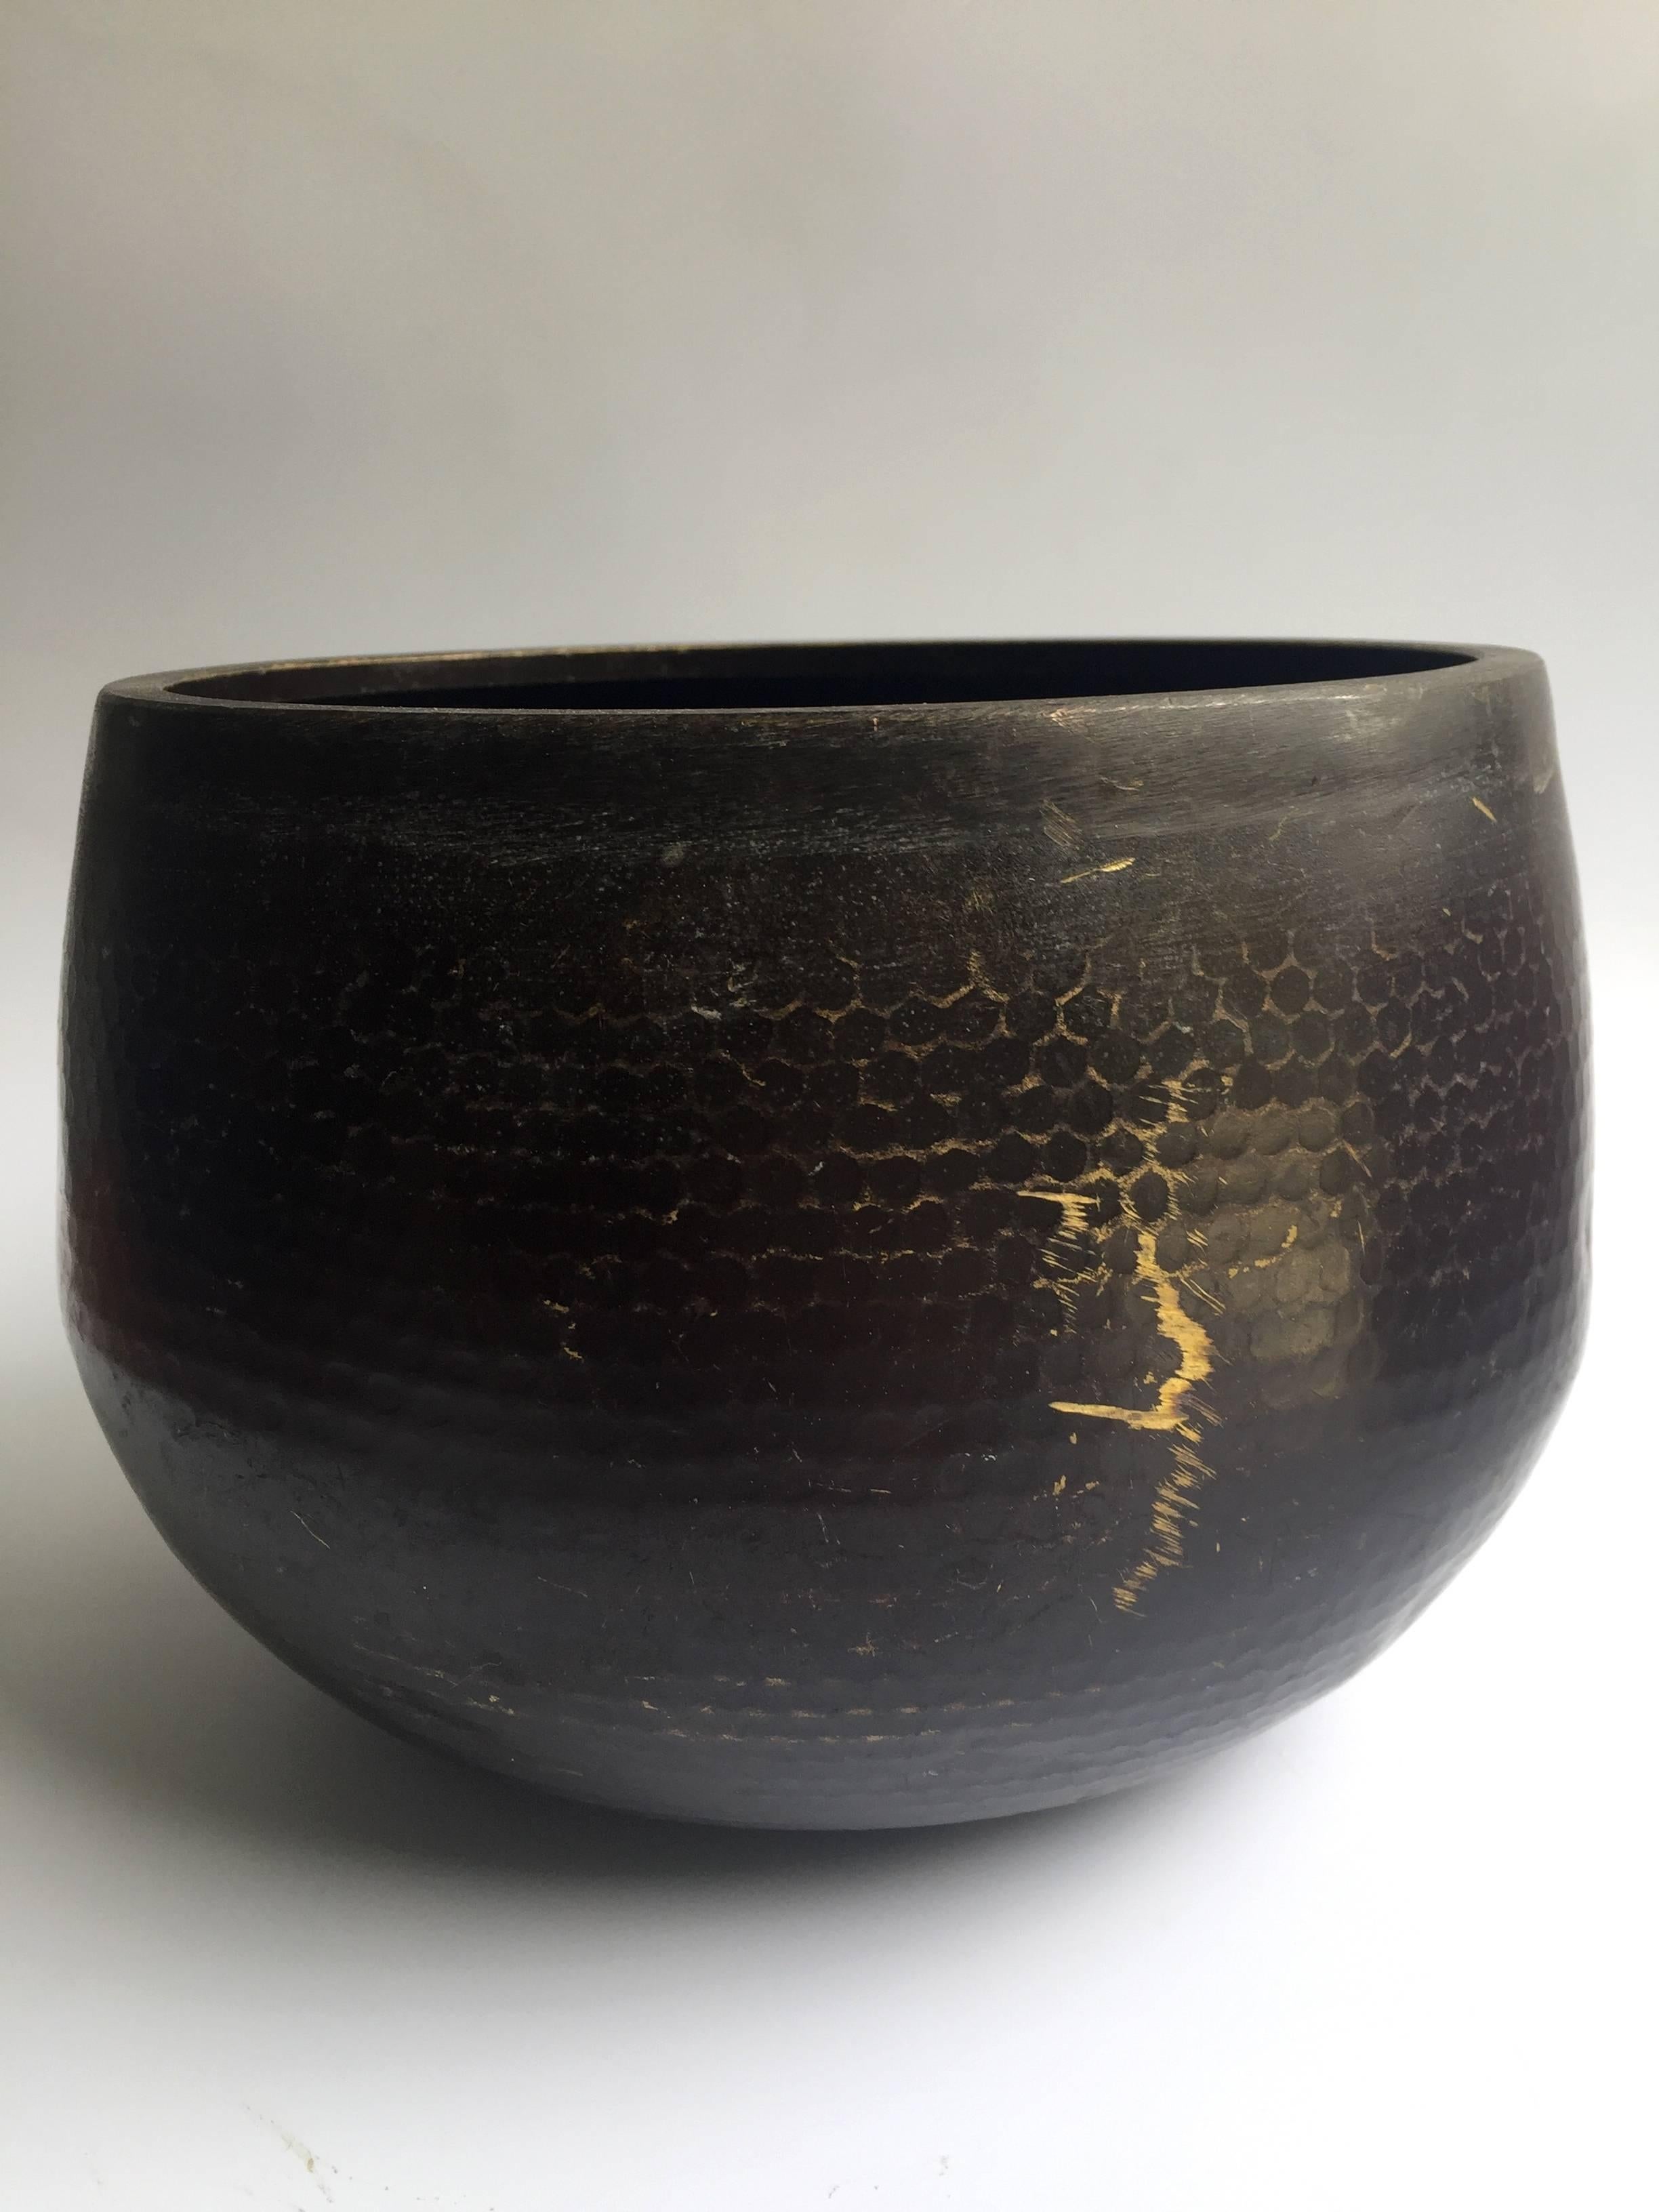 This is a set of handmade, substantial, antique Japanese singing bowls.

The material is solid bronze. All patina is original. This bowl makes the most beautiful, enlightening, deep sound that is at once soothing and thought provoking.

The